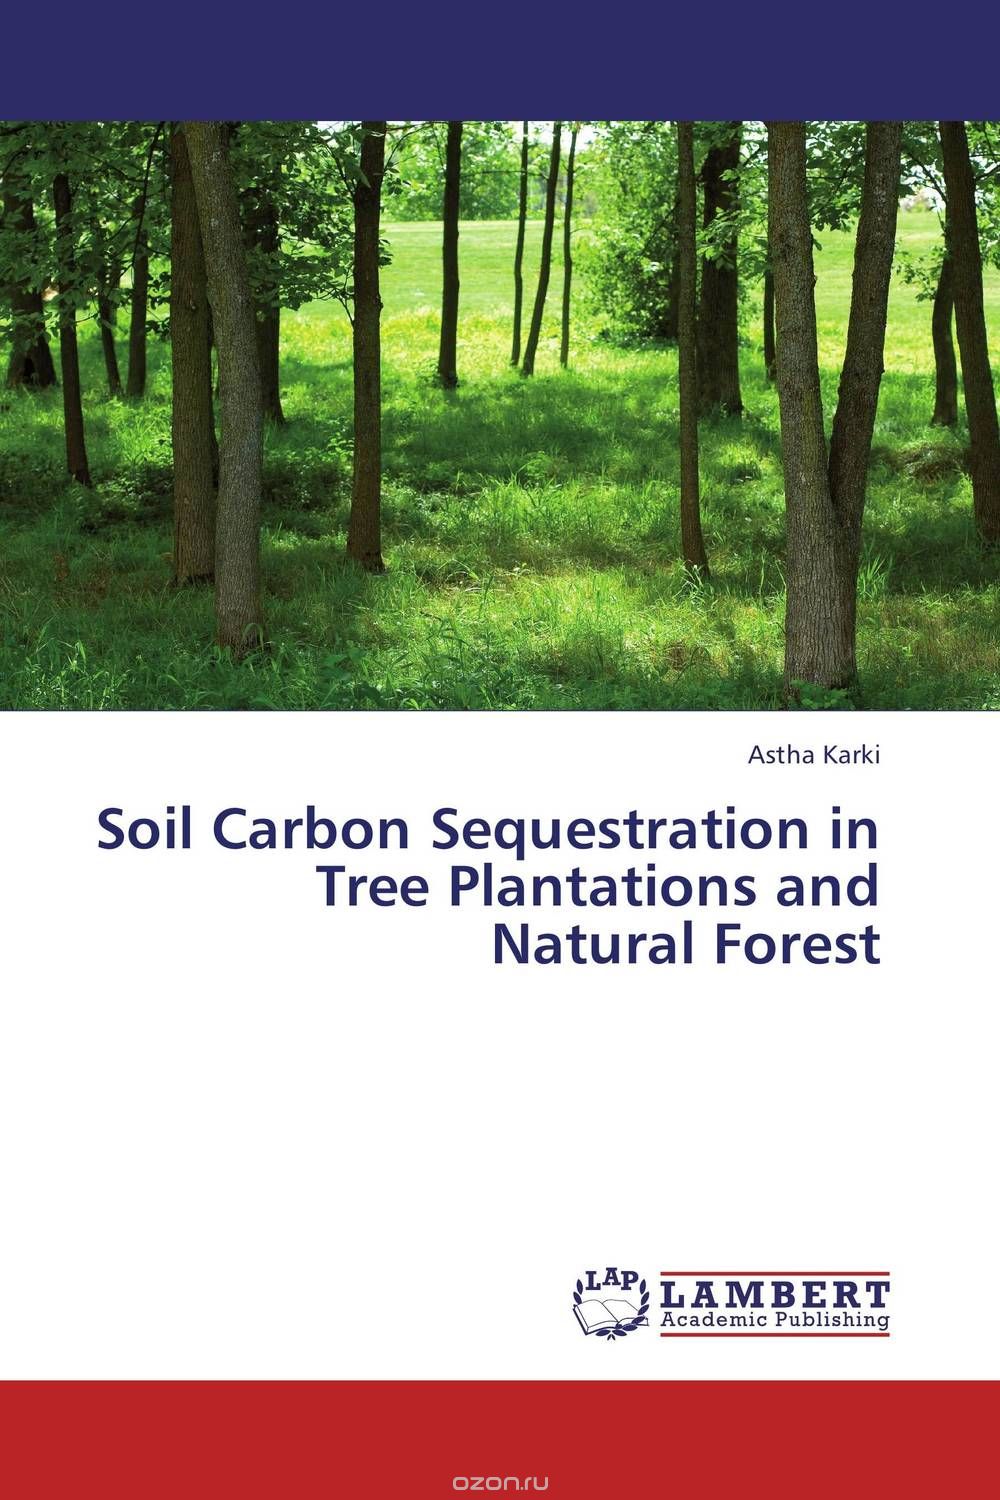 Скачать книгу "Soil Carbon Sequestration in Tree Plantations and Natural Forest"